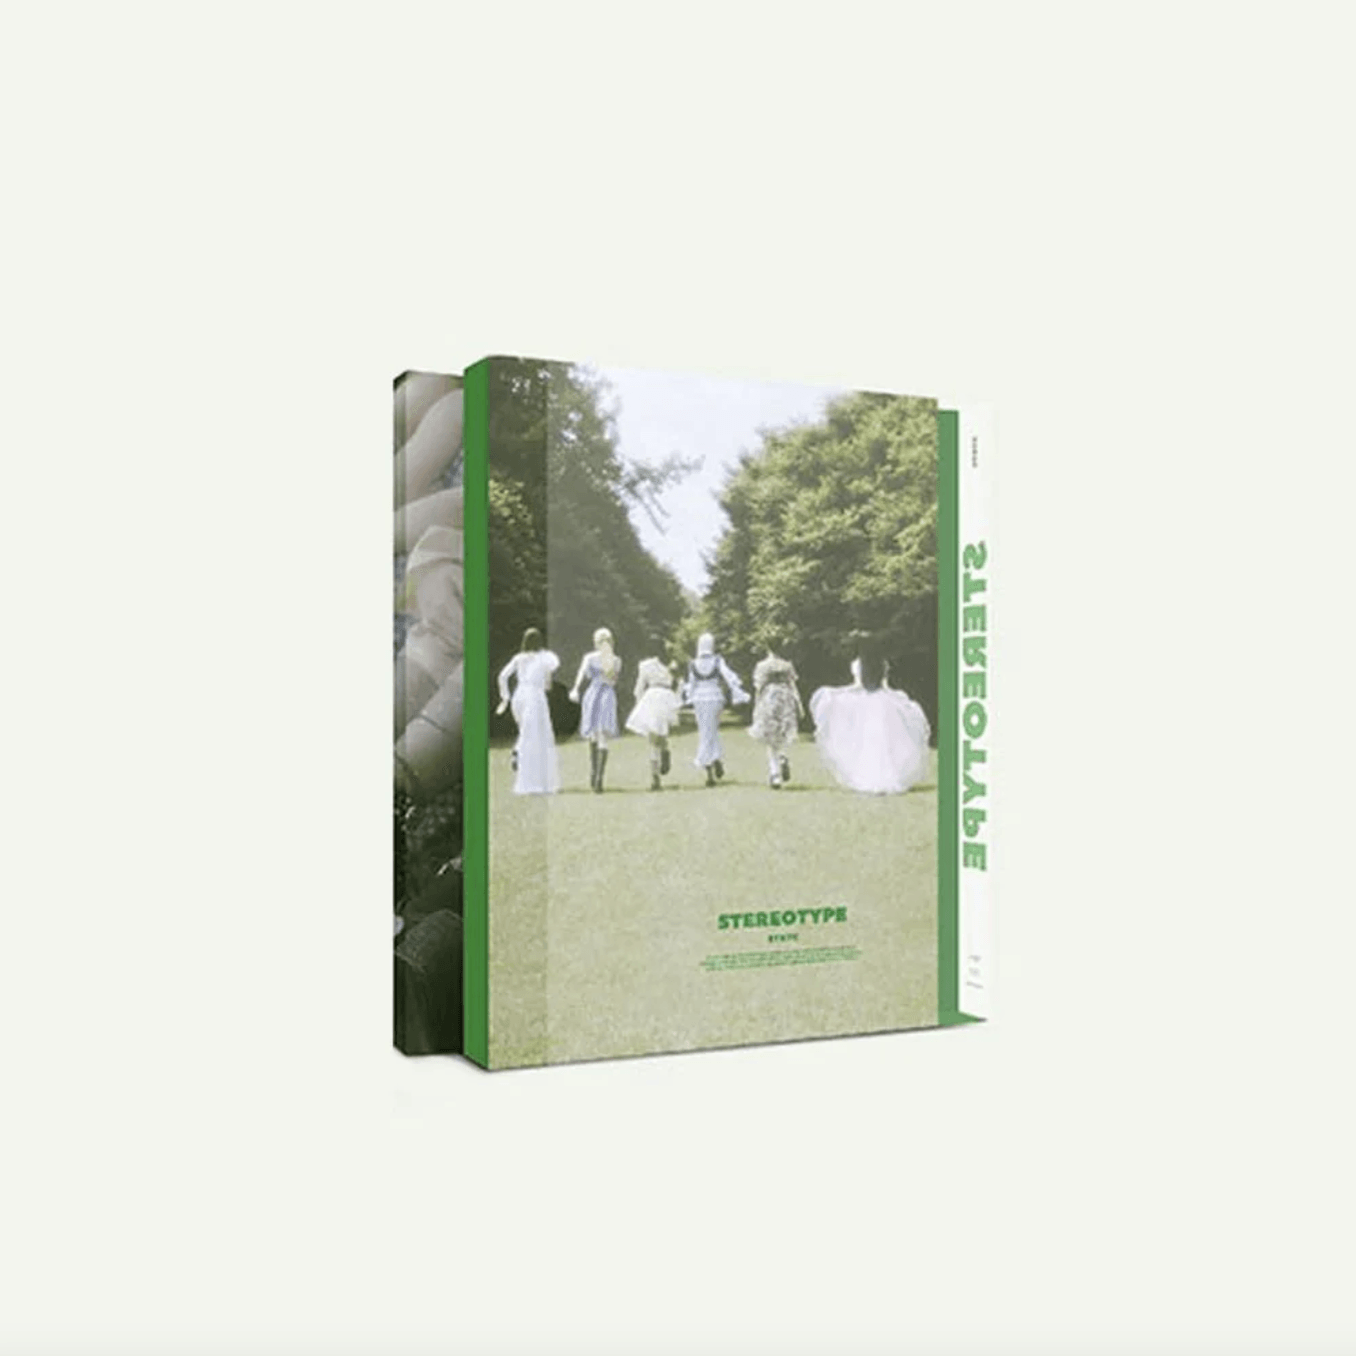 STAYC 1ST MINI ALBUM 'STEREOTYPE' TYPE B VERSION COVER